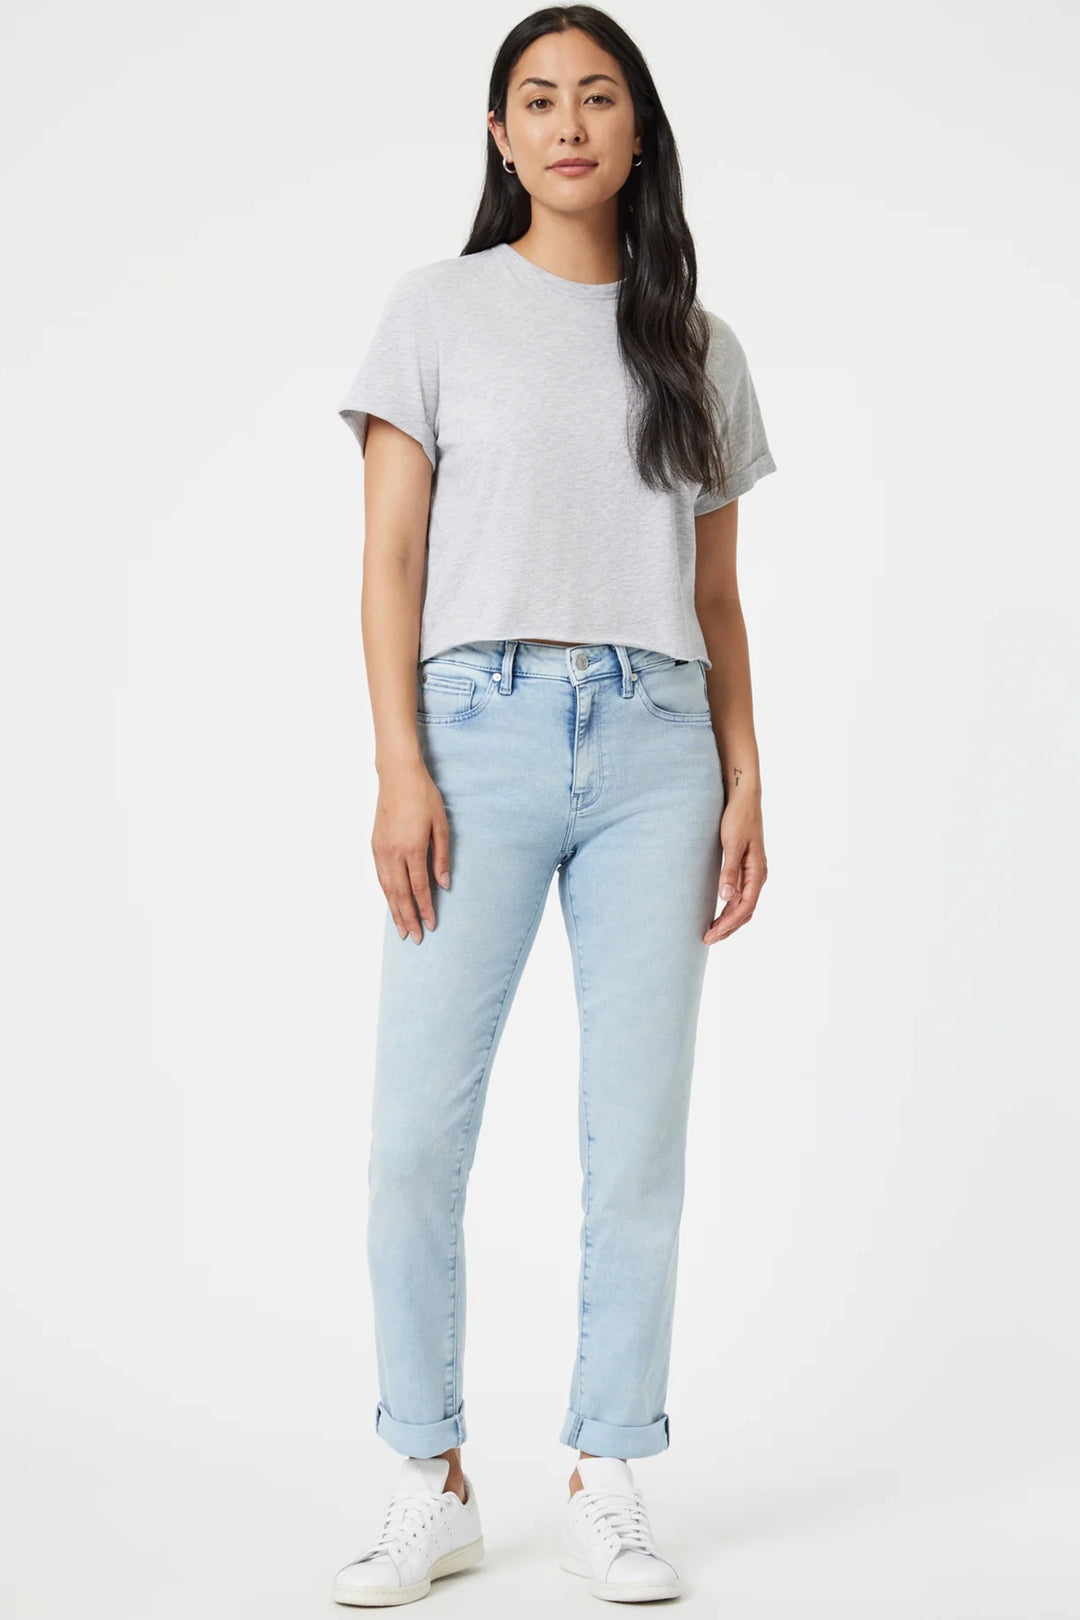 Mavi Spring 2024 Introducing the Kathleen Slim Boyfriend, a midweight denim jean that offers a slim fit and high rise for a flattering silhouette.